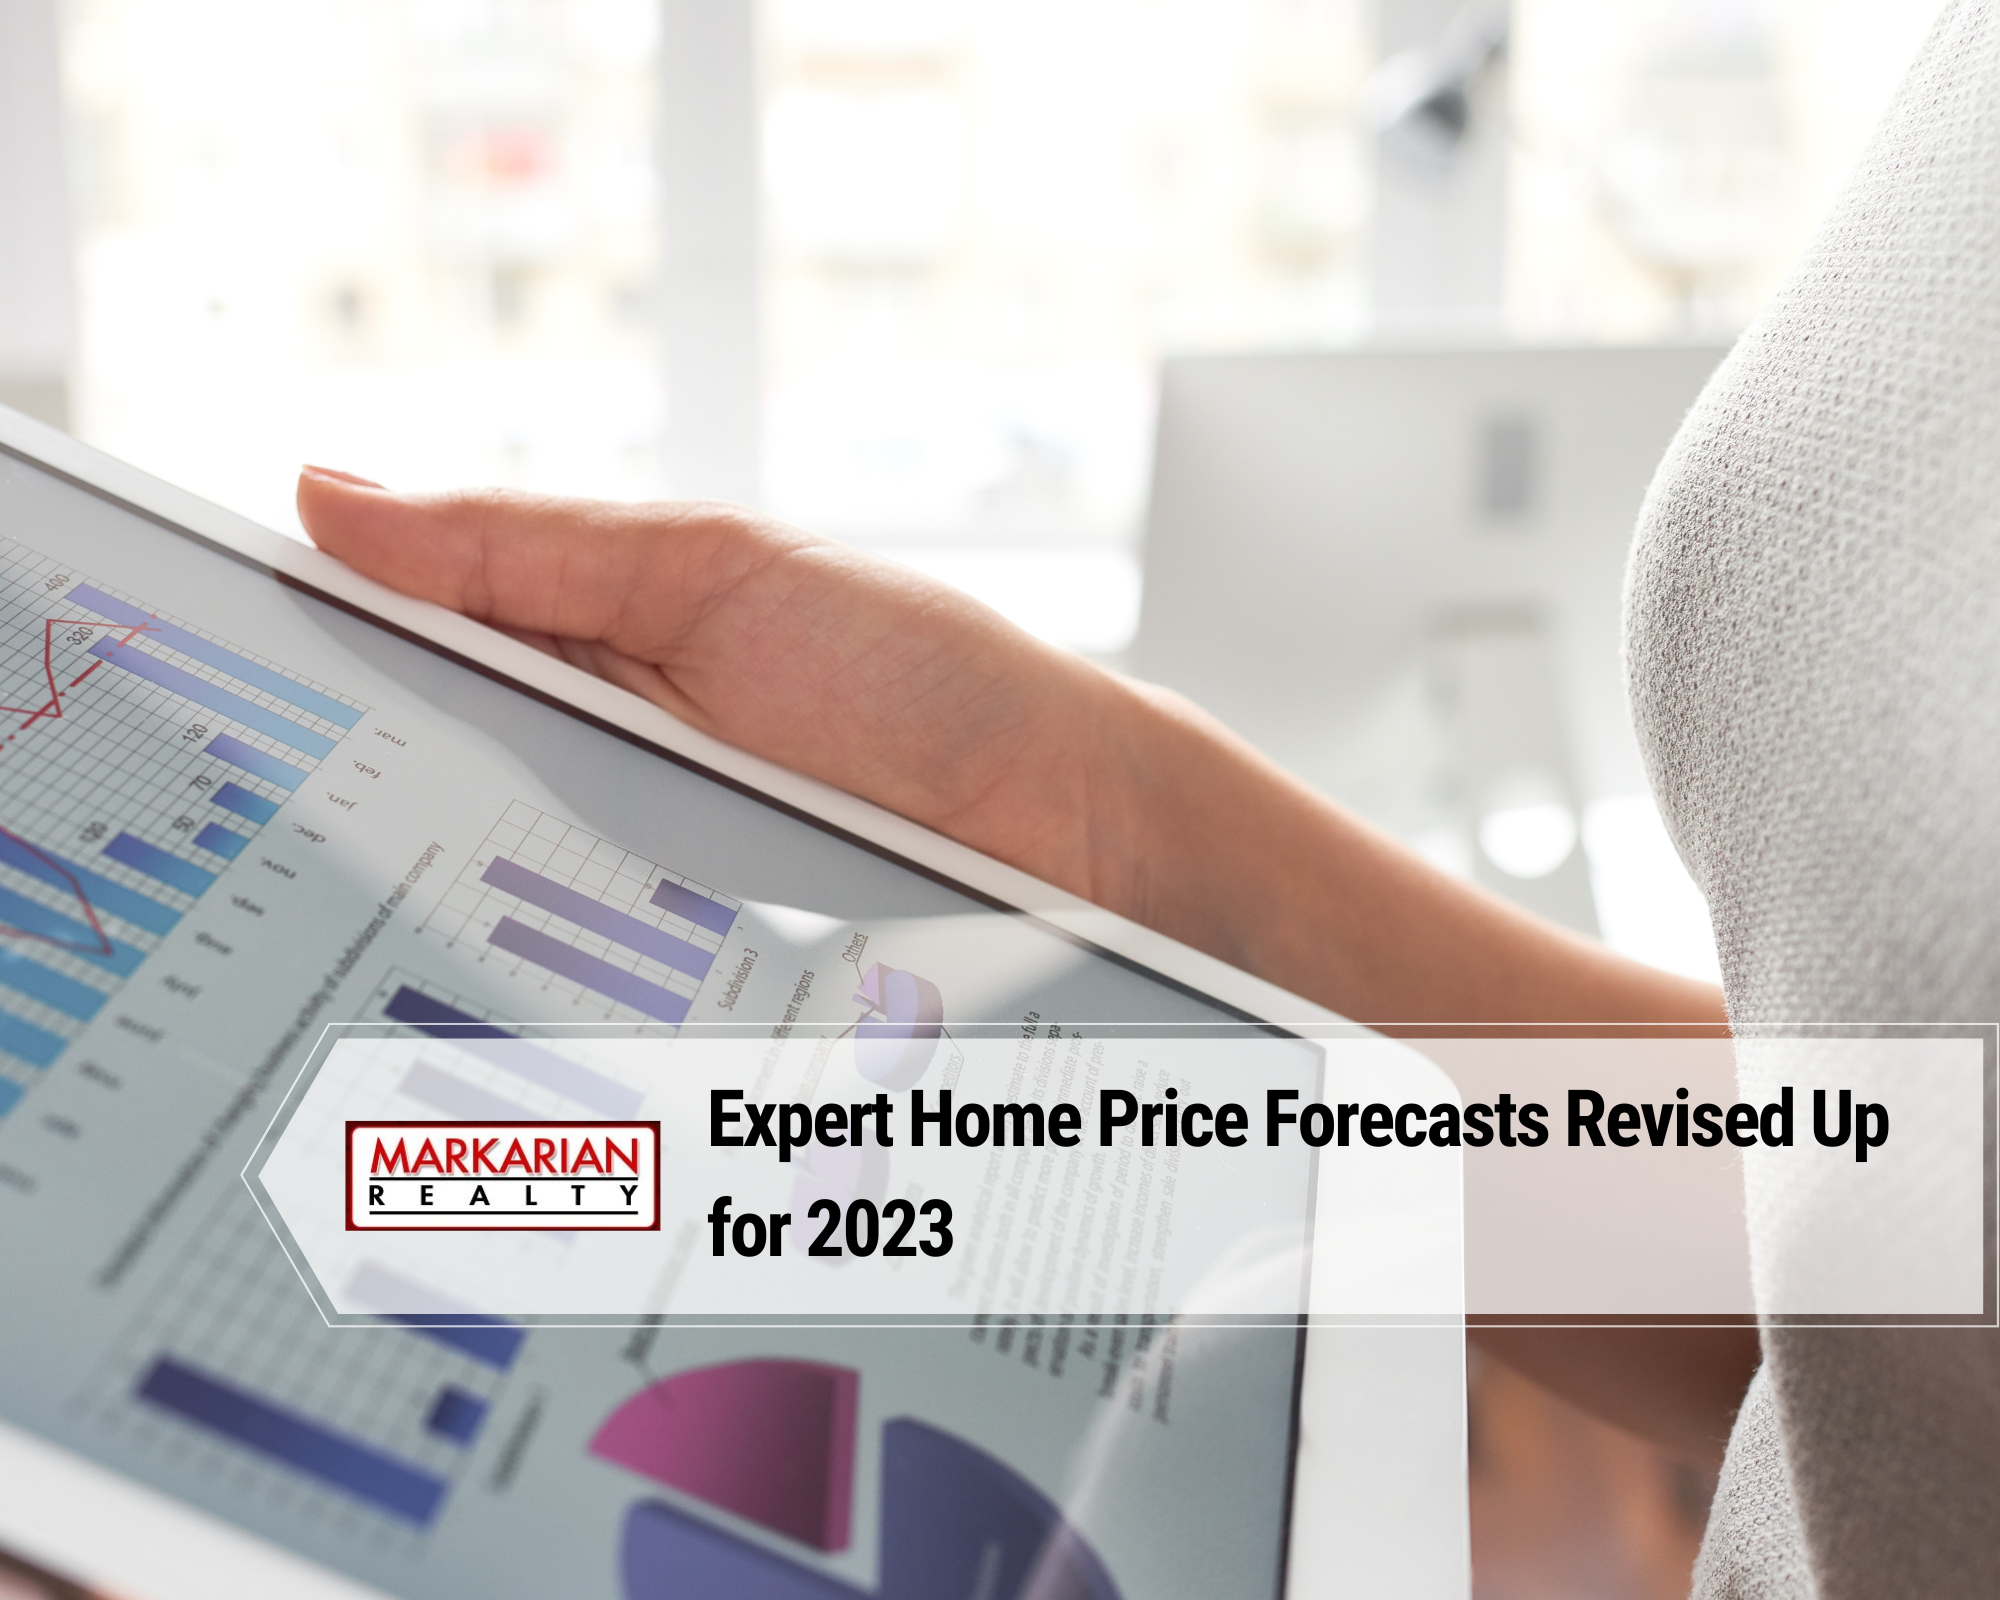 Expert Home Price Forecasts Revised Up for 2023